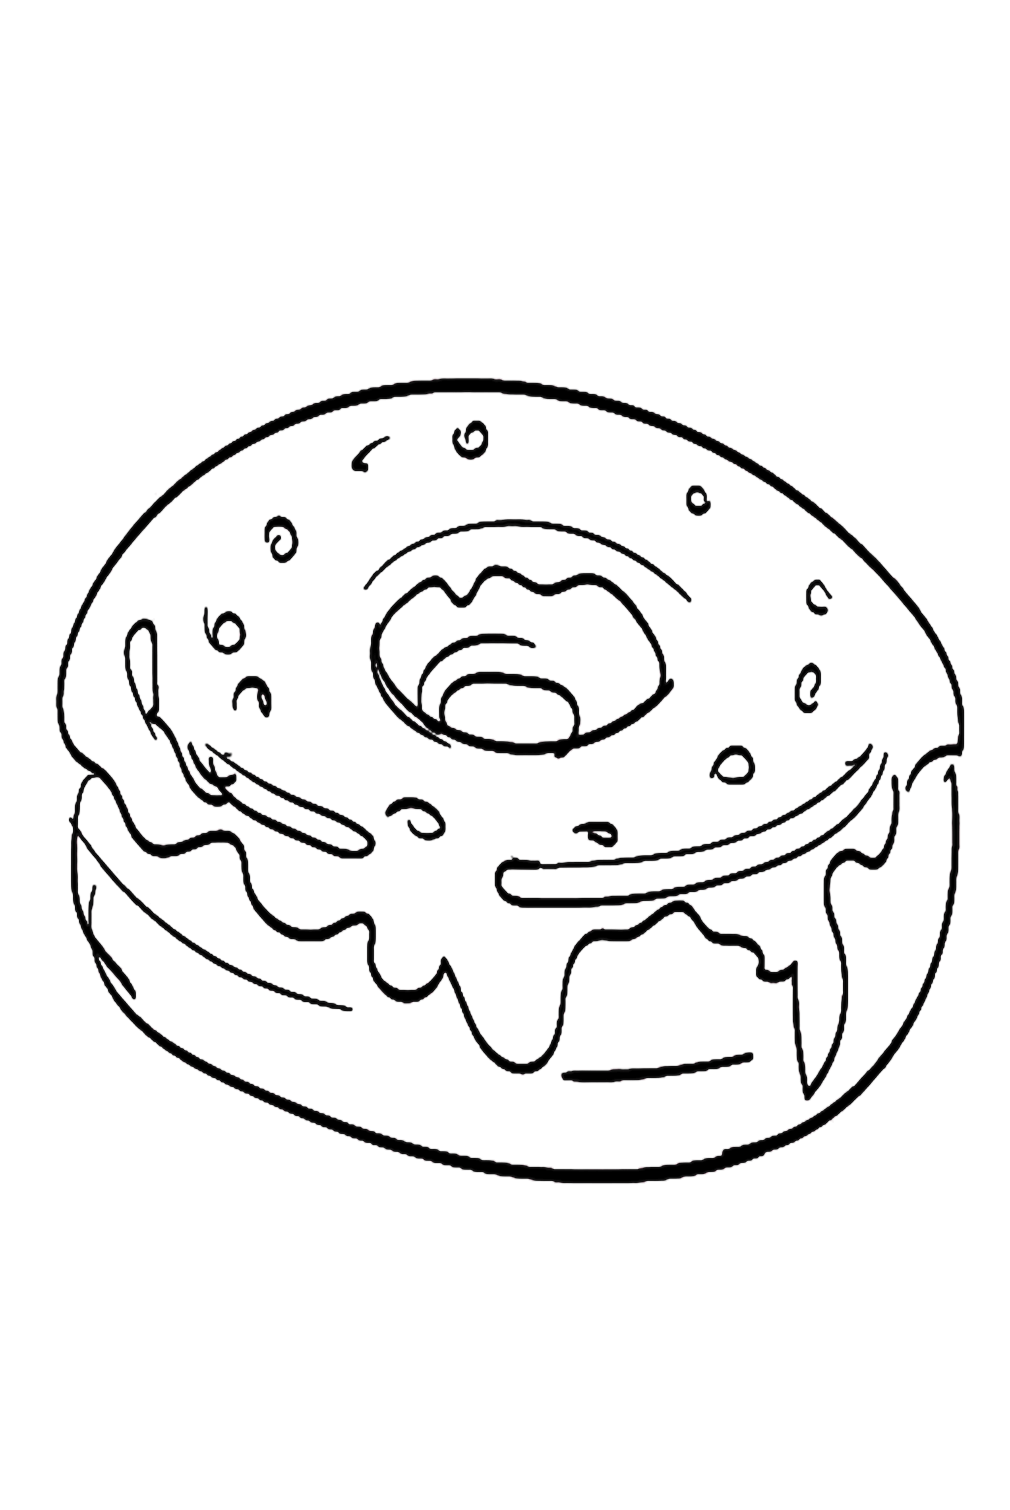 Donut Pictures To Color from Donut